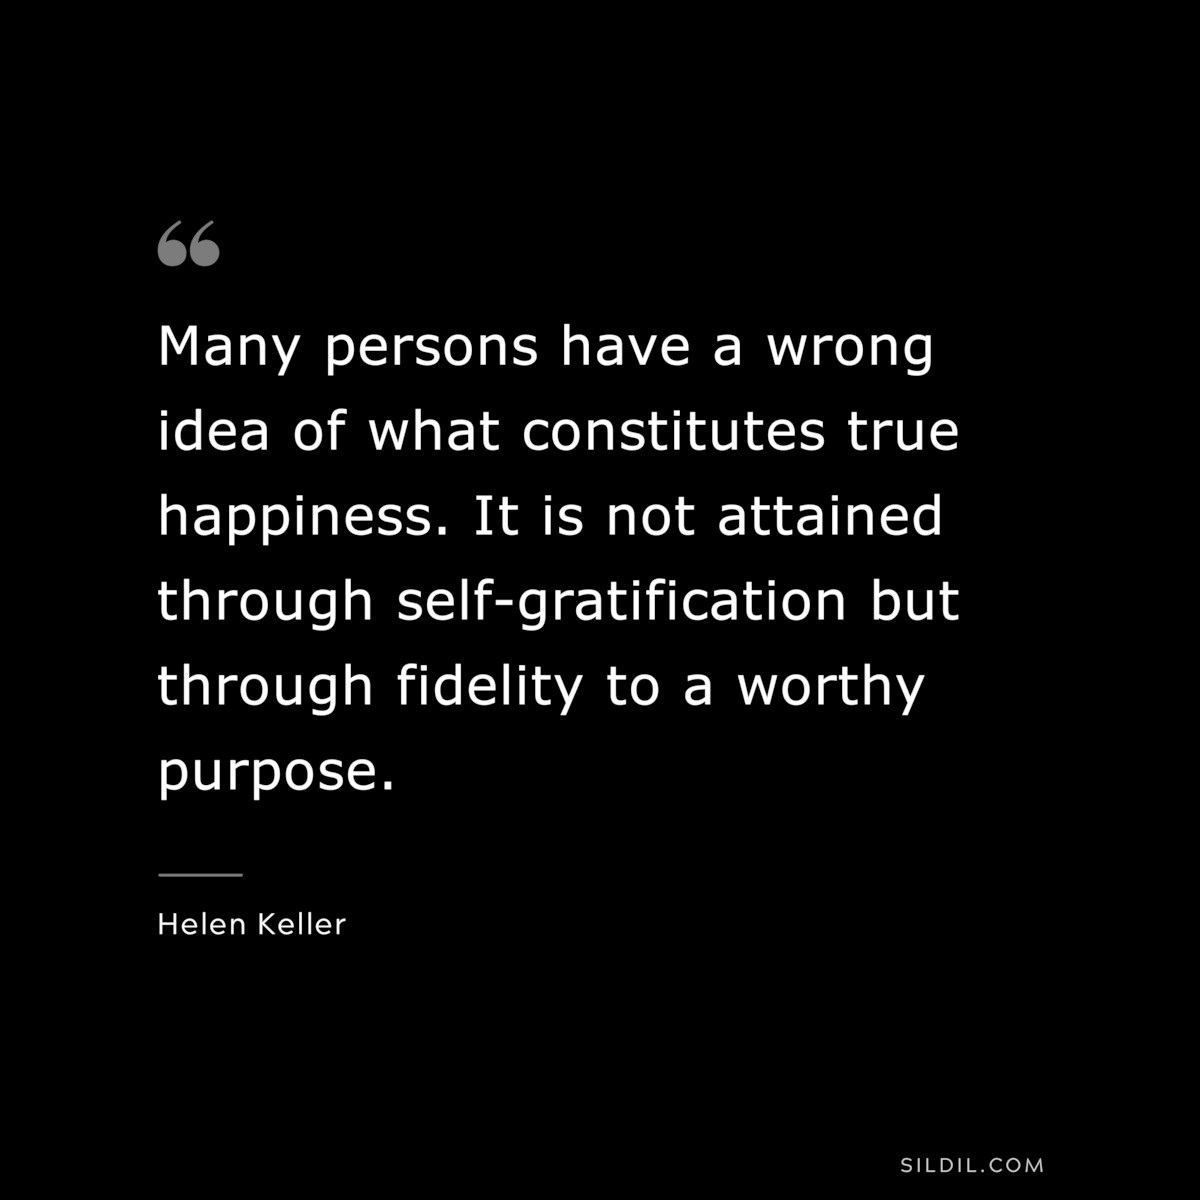 Many persons have a wrong idea of what constitutes true happiness. It is not attained through self-gratification but through fidelity to a worthy purpose. ― Helen Keller